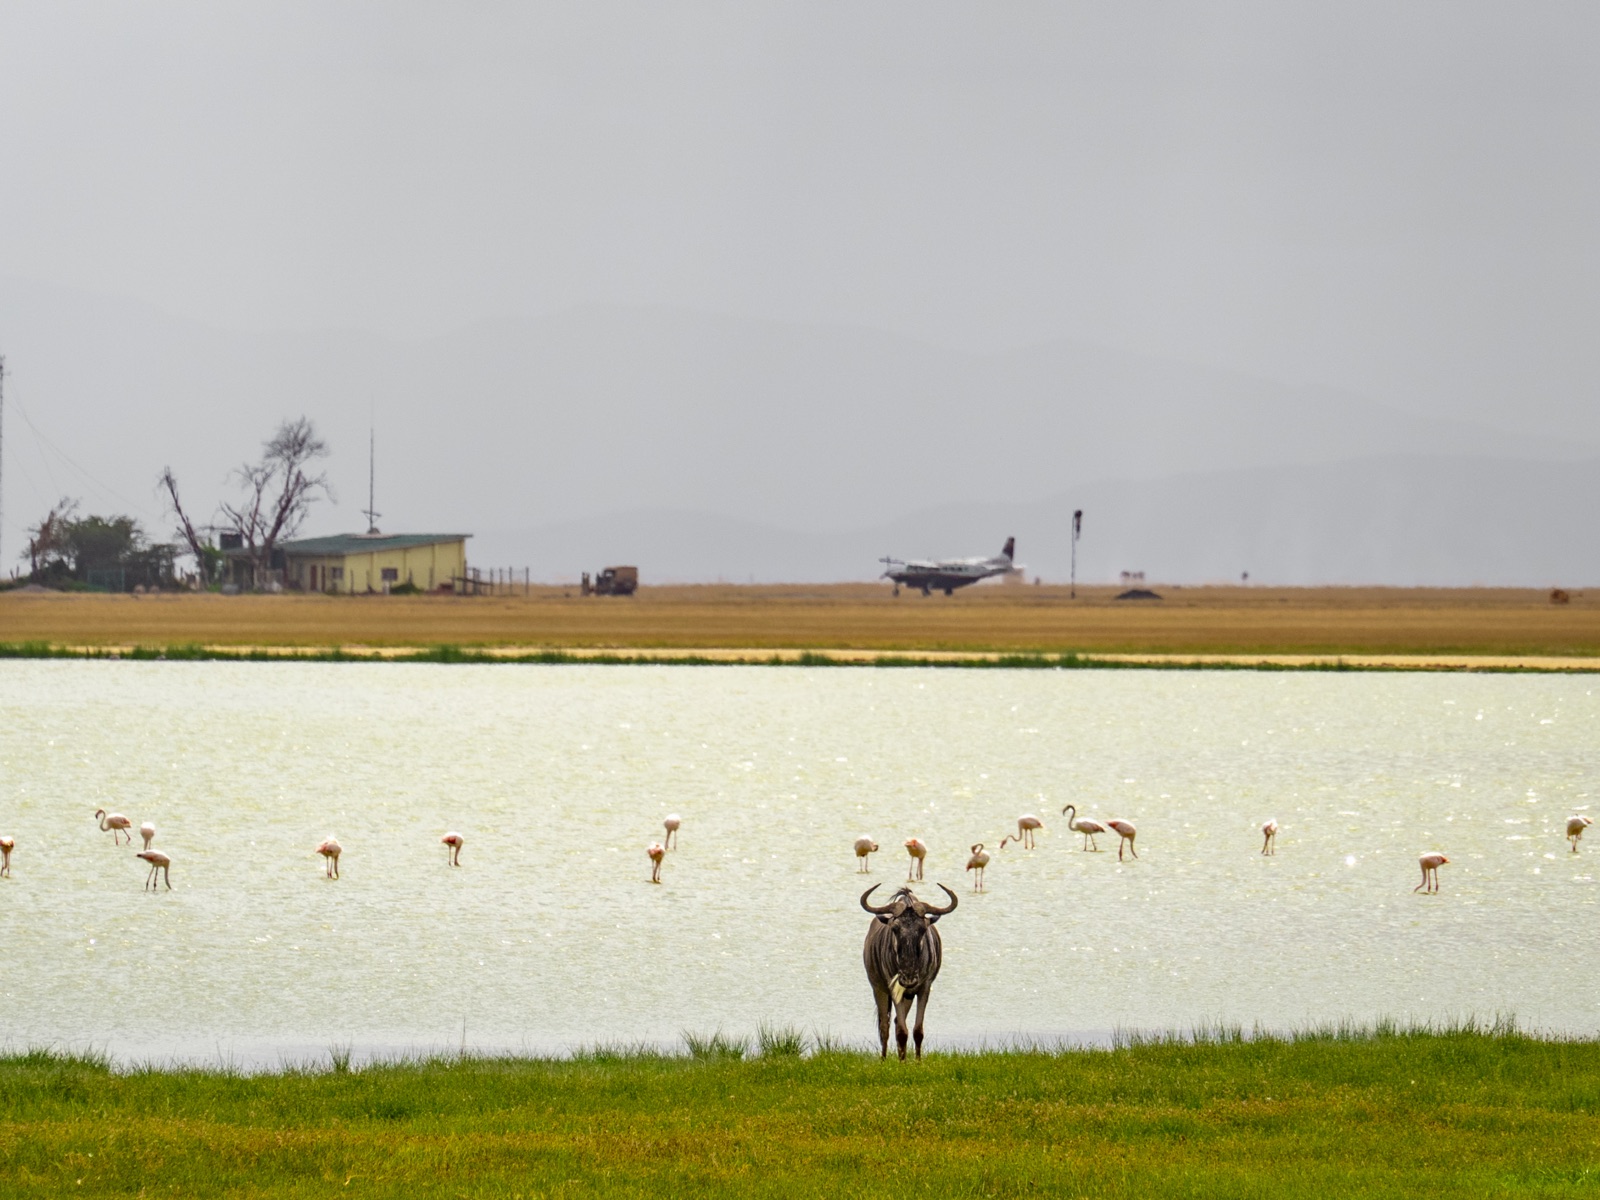 A wildebeest standing by a waterhole with flamingos and a plane in the background.